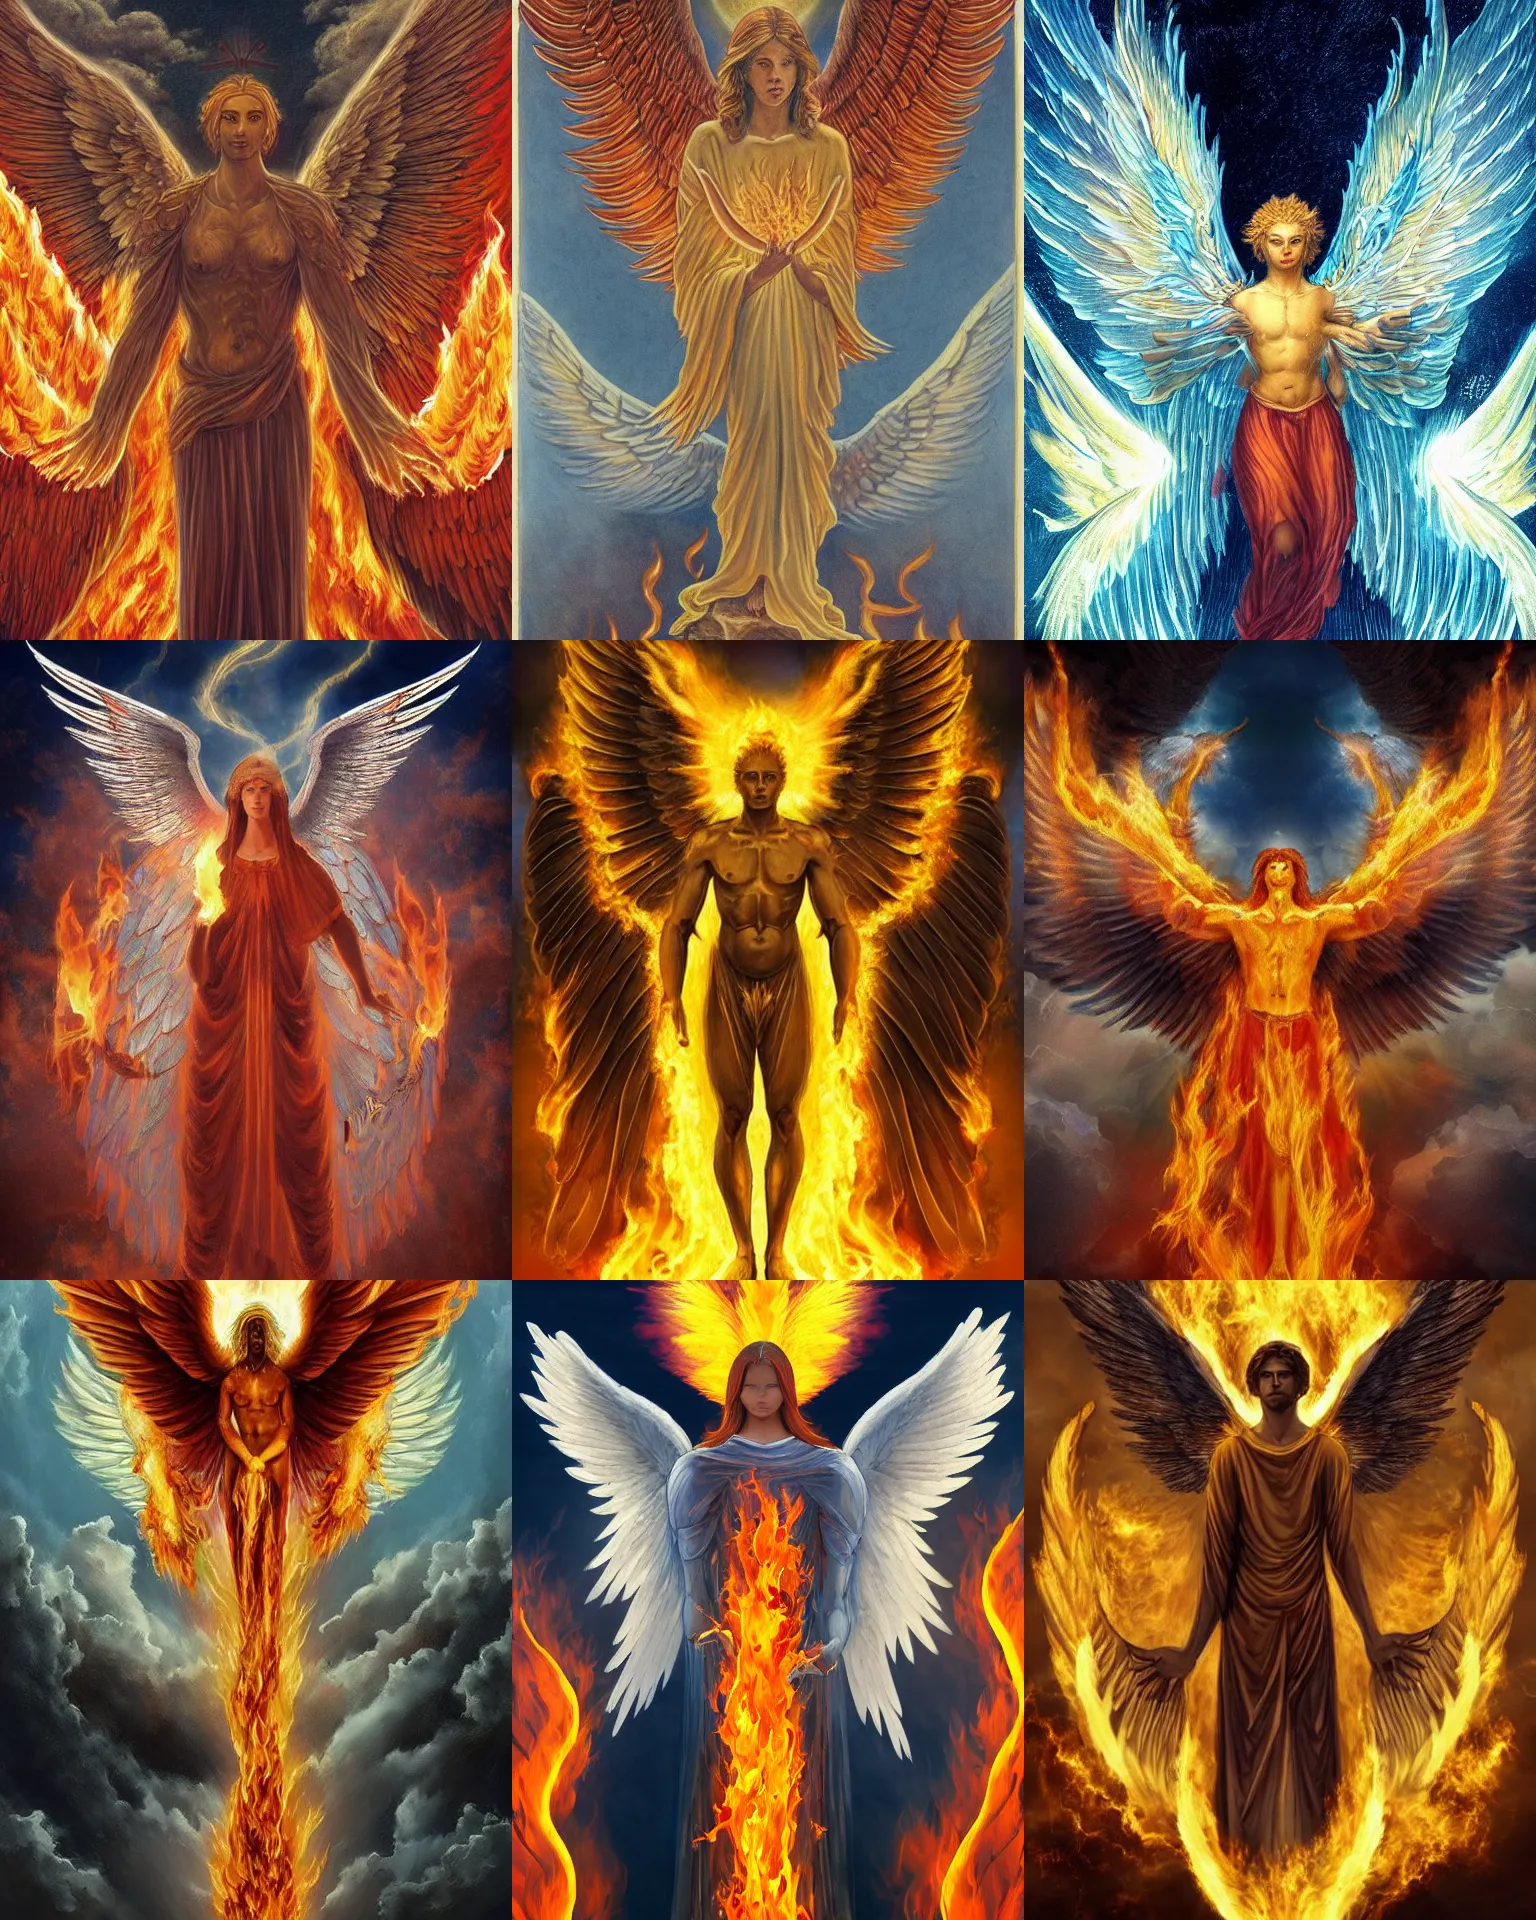 Prompt: angelic fiery male seraphim, male humanoid figure made of fire, wings of fire, halo of fire, body of pure fire, surrounded by flames, descending from the heavens, highly detailed, cinematic, dramatic, sublime, wide angle